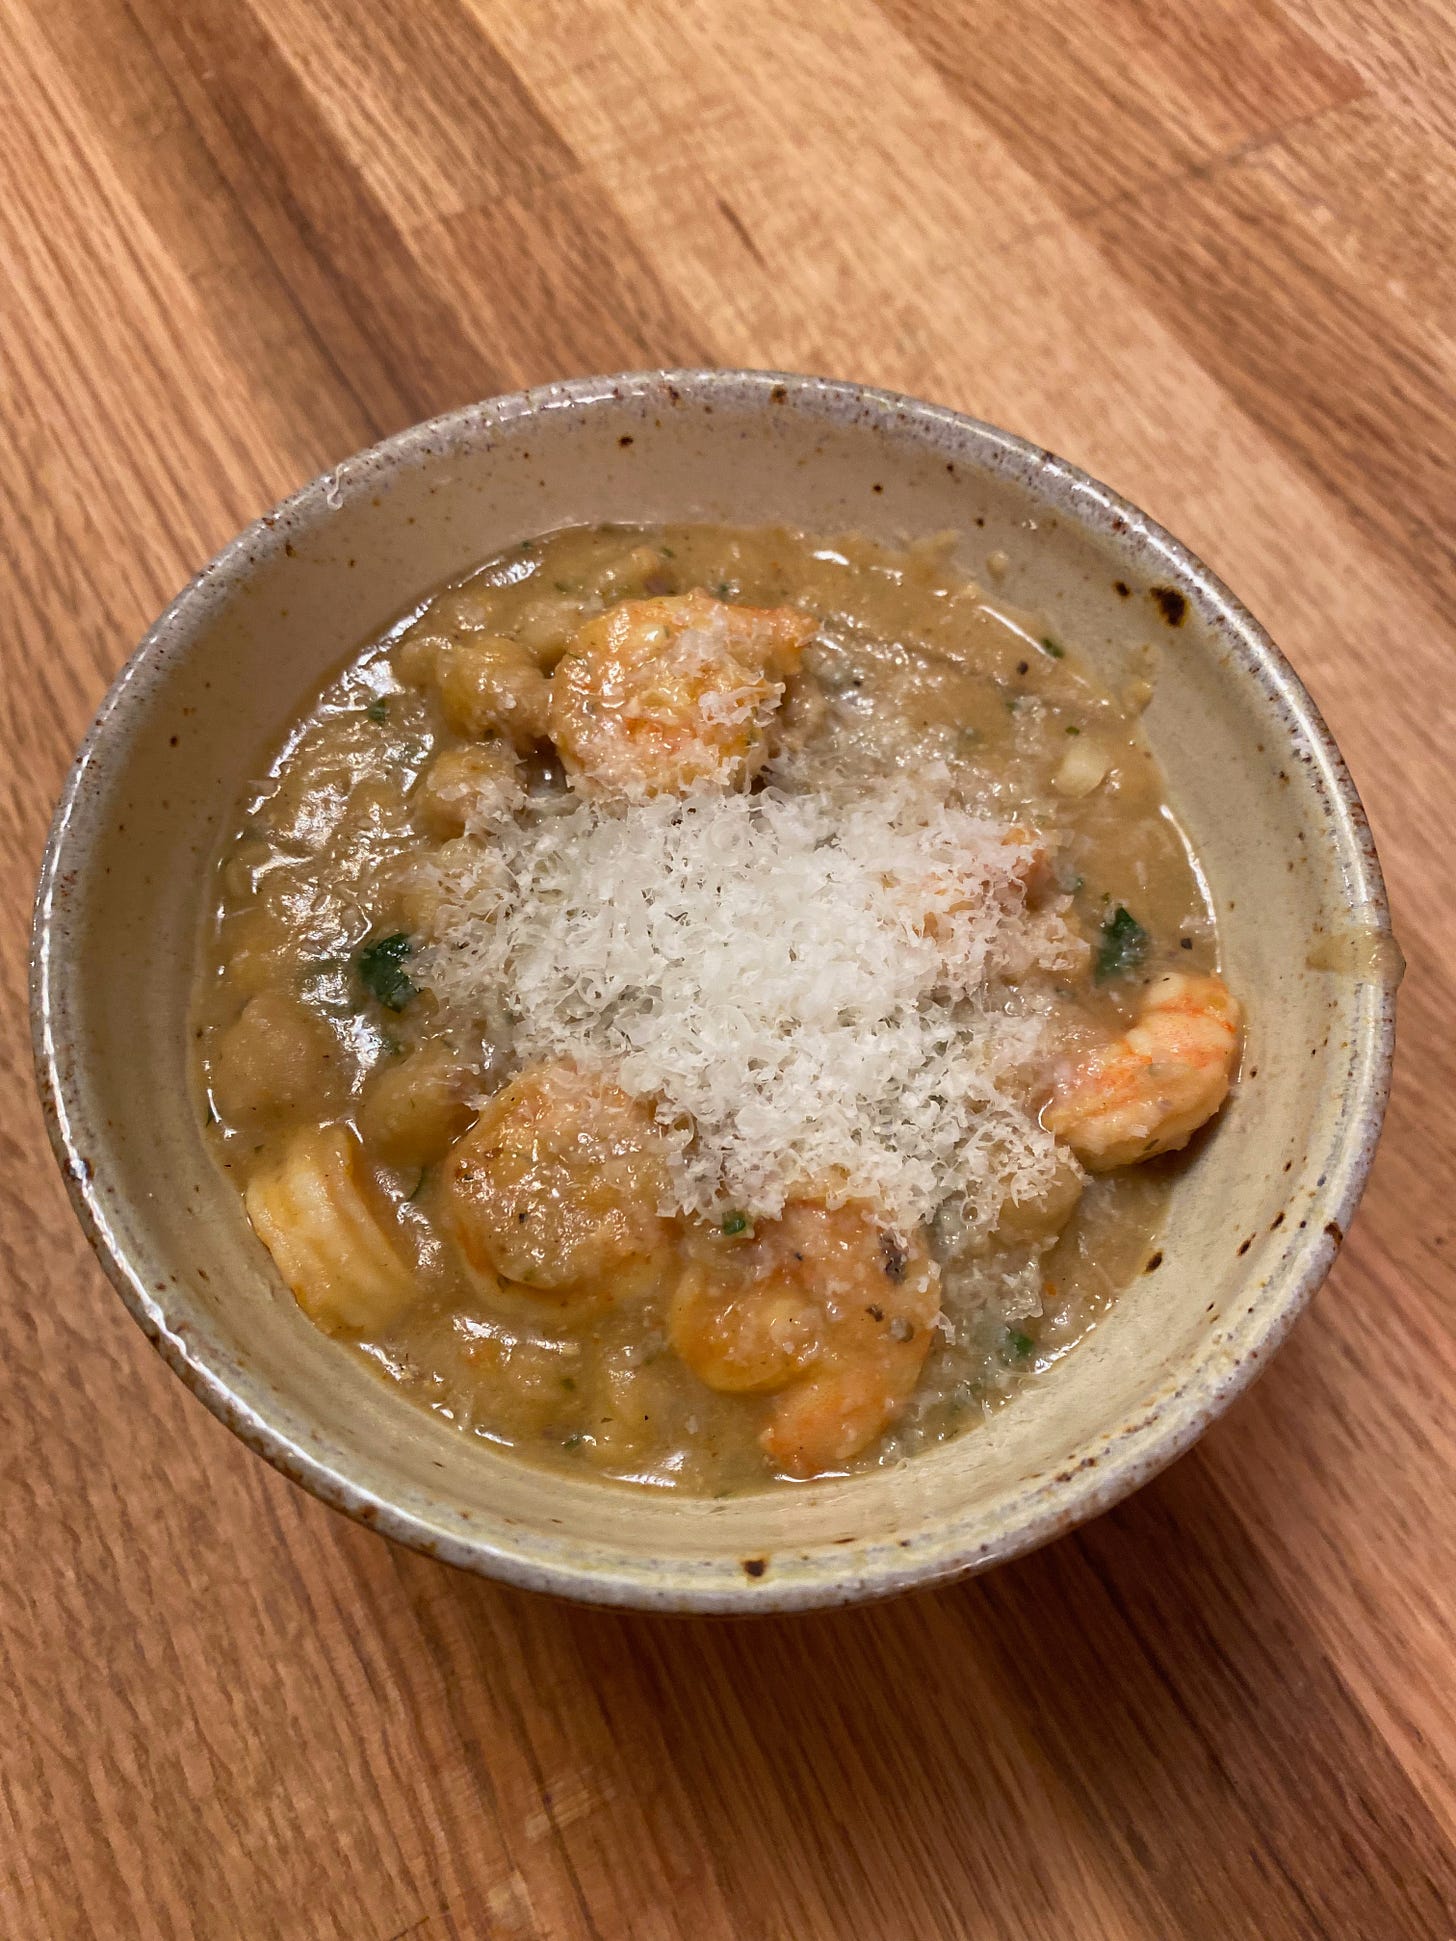 A bowl of thick chickpea stew, full of small shrimp and flecks of parsley, topped with a large pile of grated Parmesan.